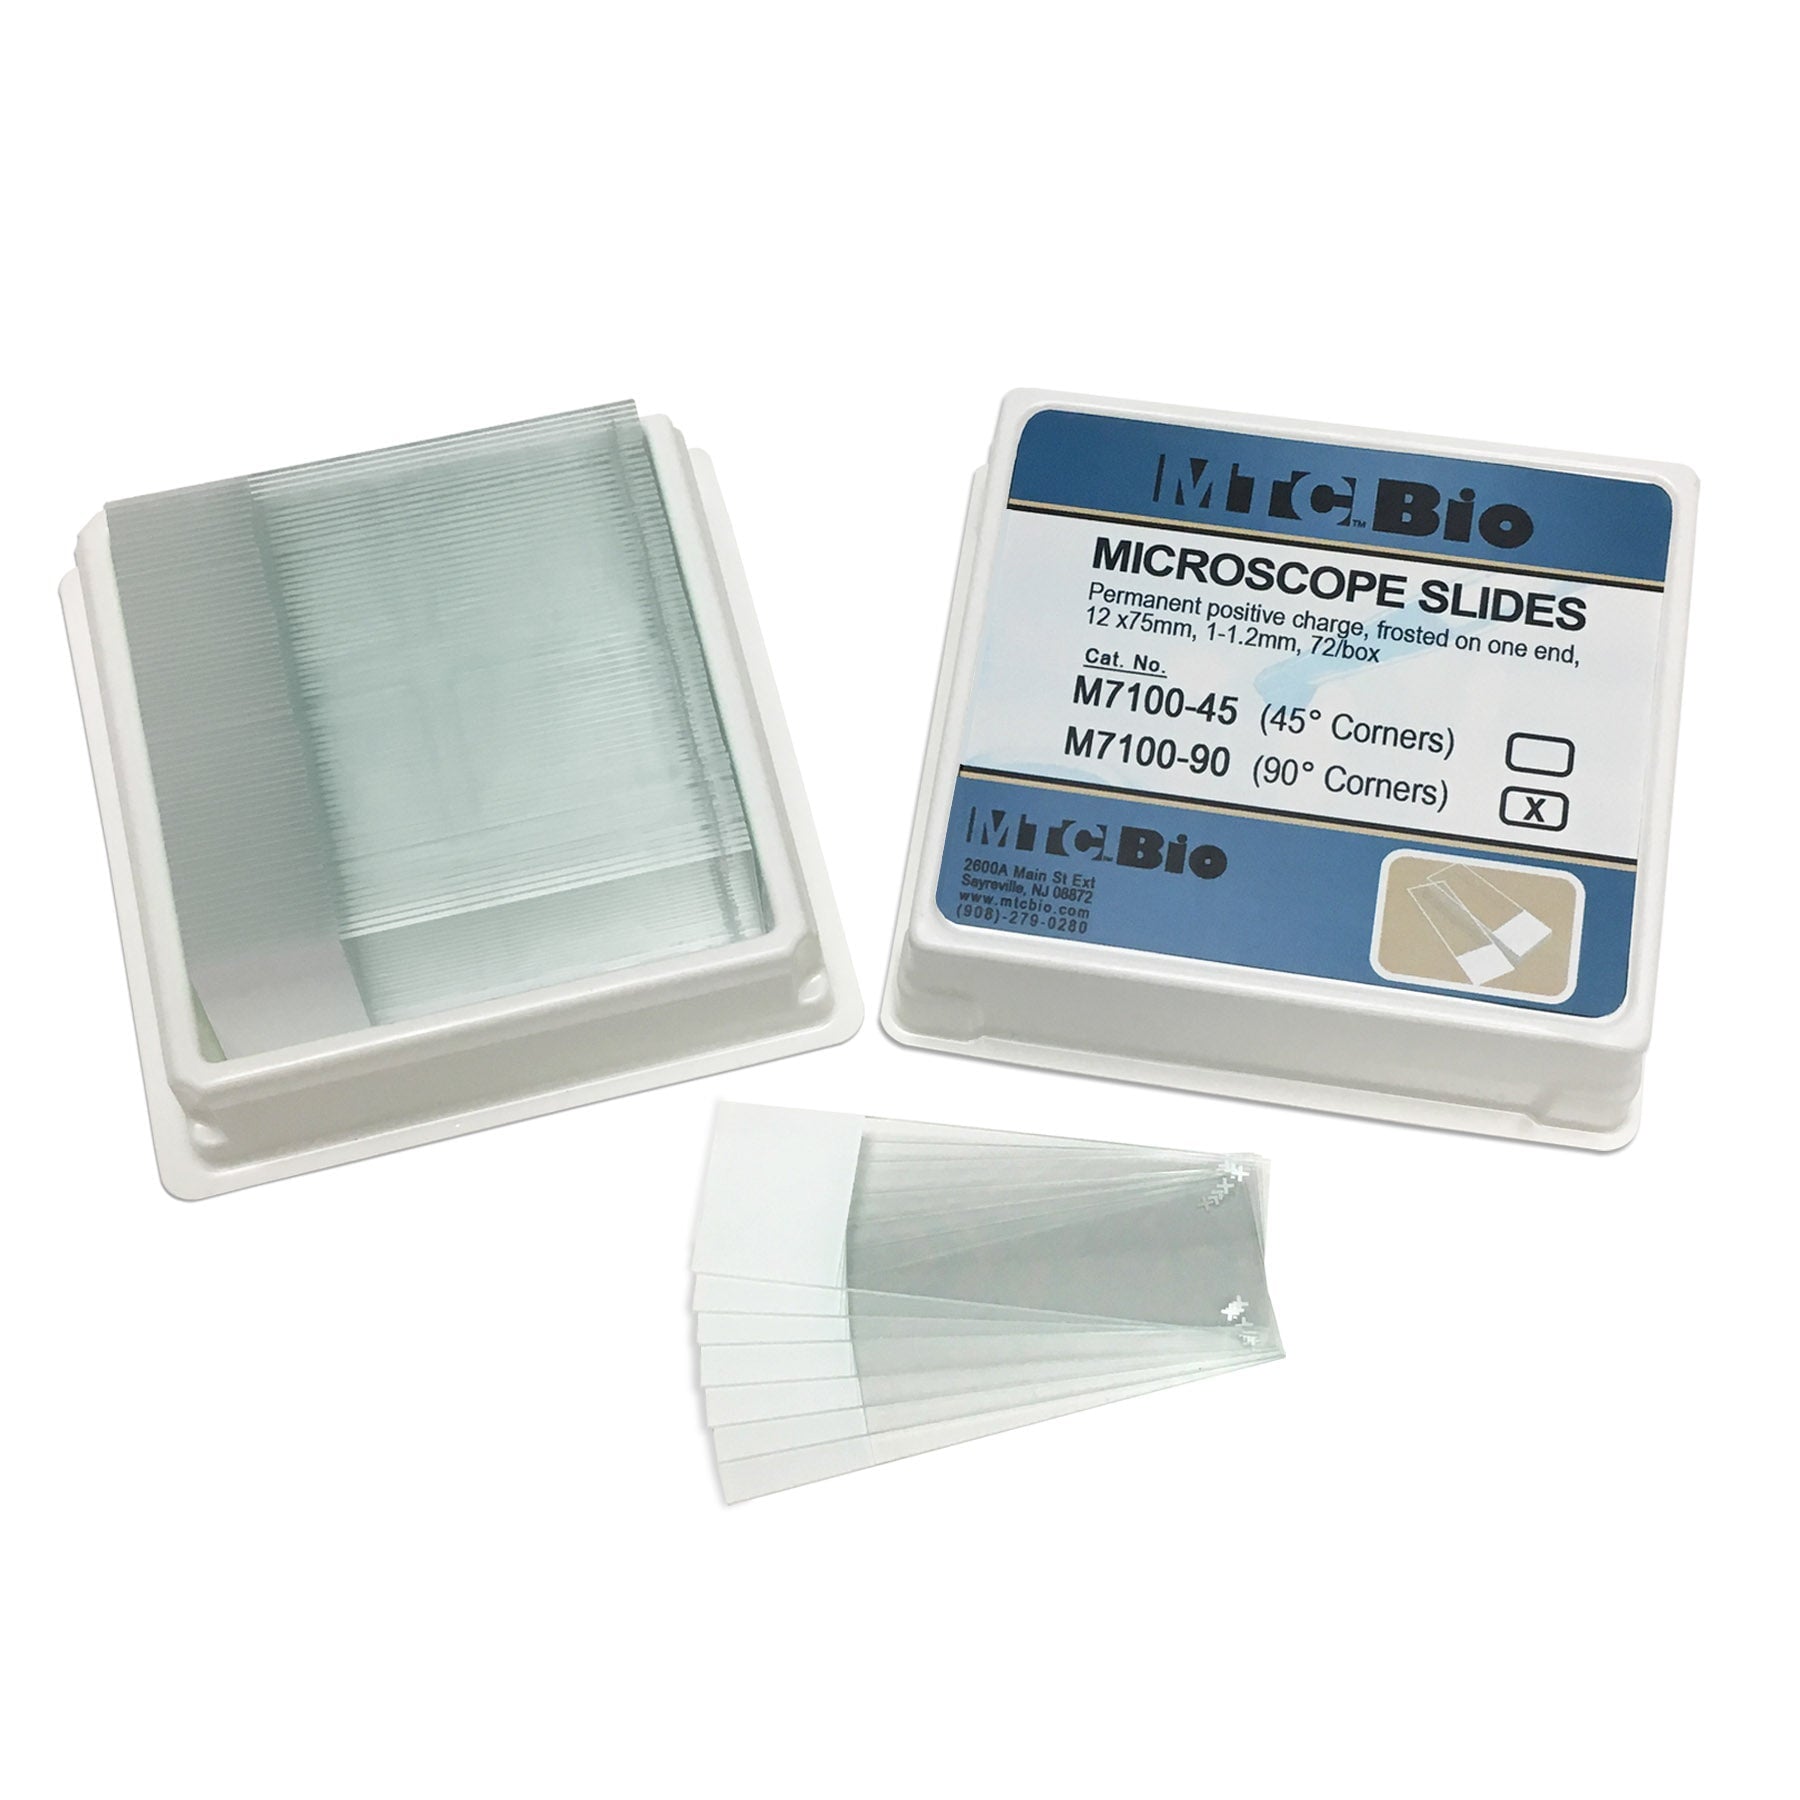 MTC Bio M7100-90 Microscope slides, positive charged, 90° corners, frosted on one end, 25 x 75mm